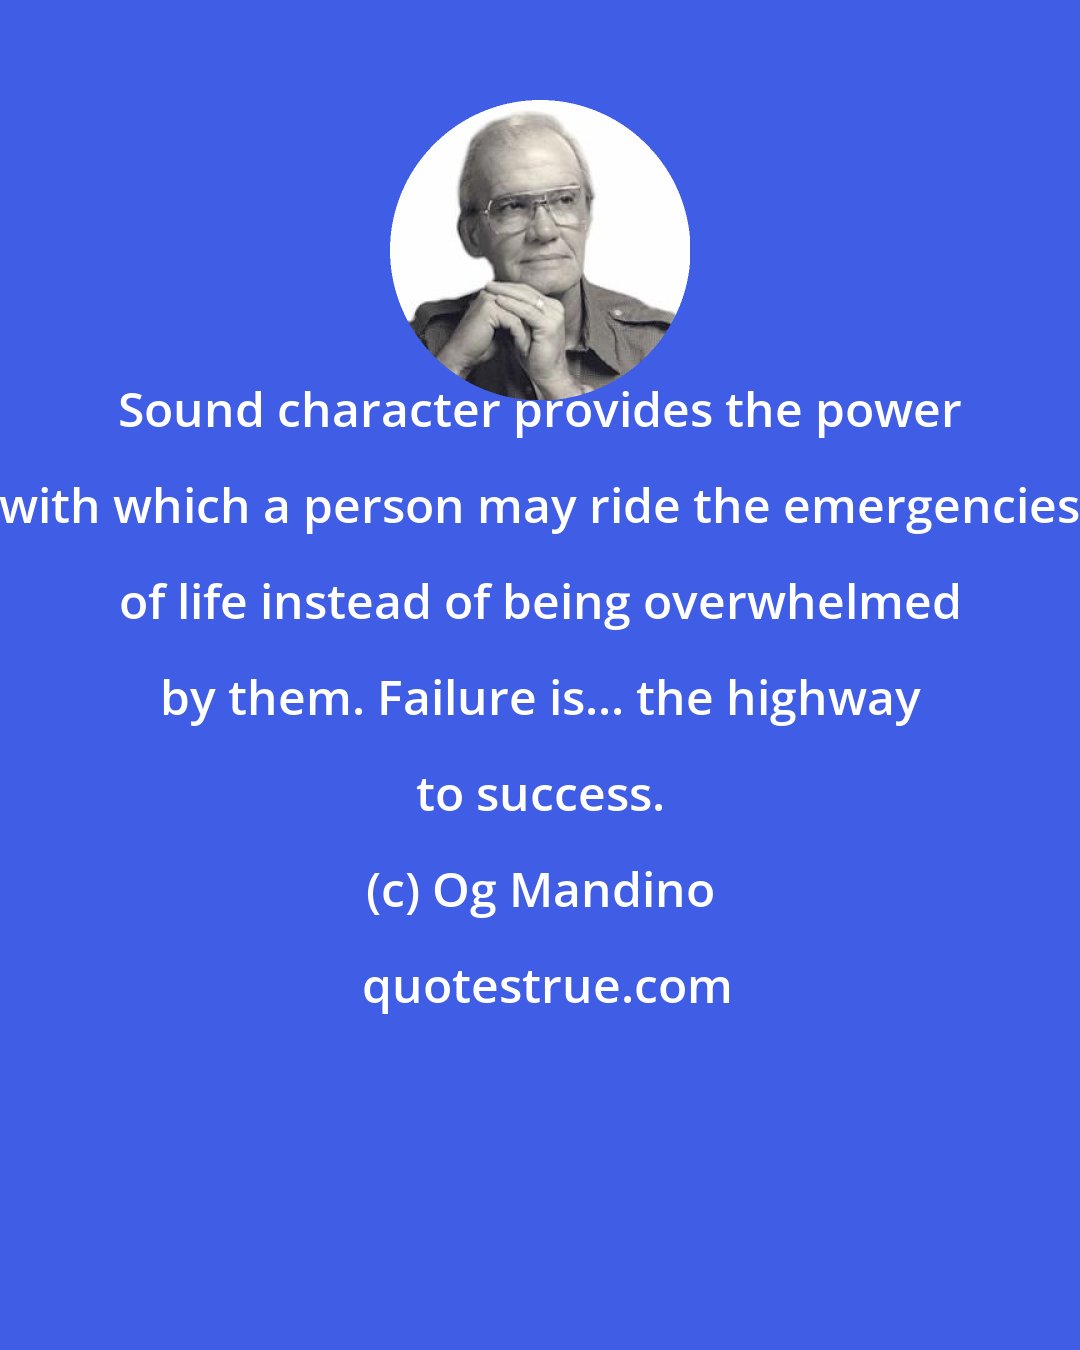 Og Mandino: Sound character provides the power with which a person may ride the emergencies of life instead of being overwhelmed by them. Failure is... the highway to success.